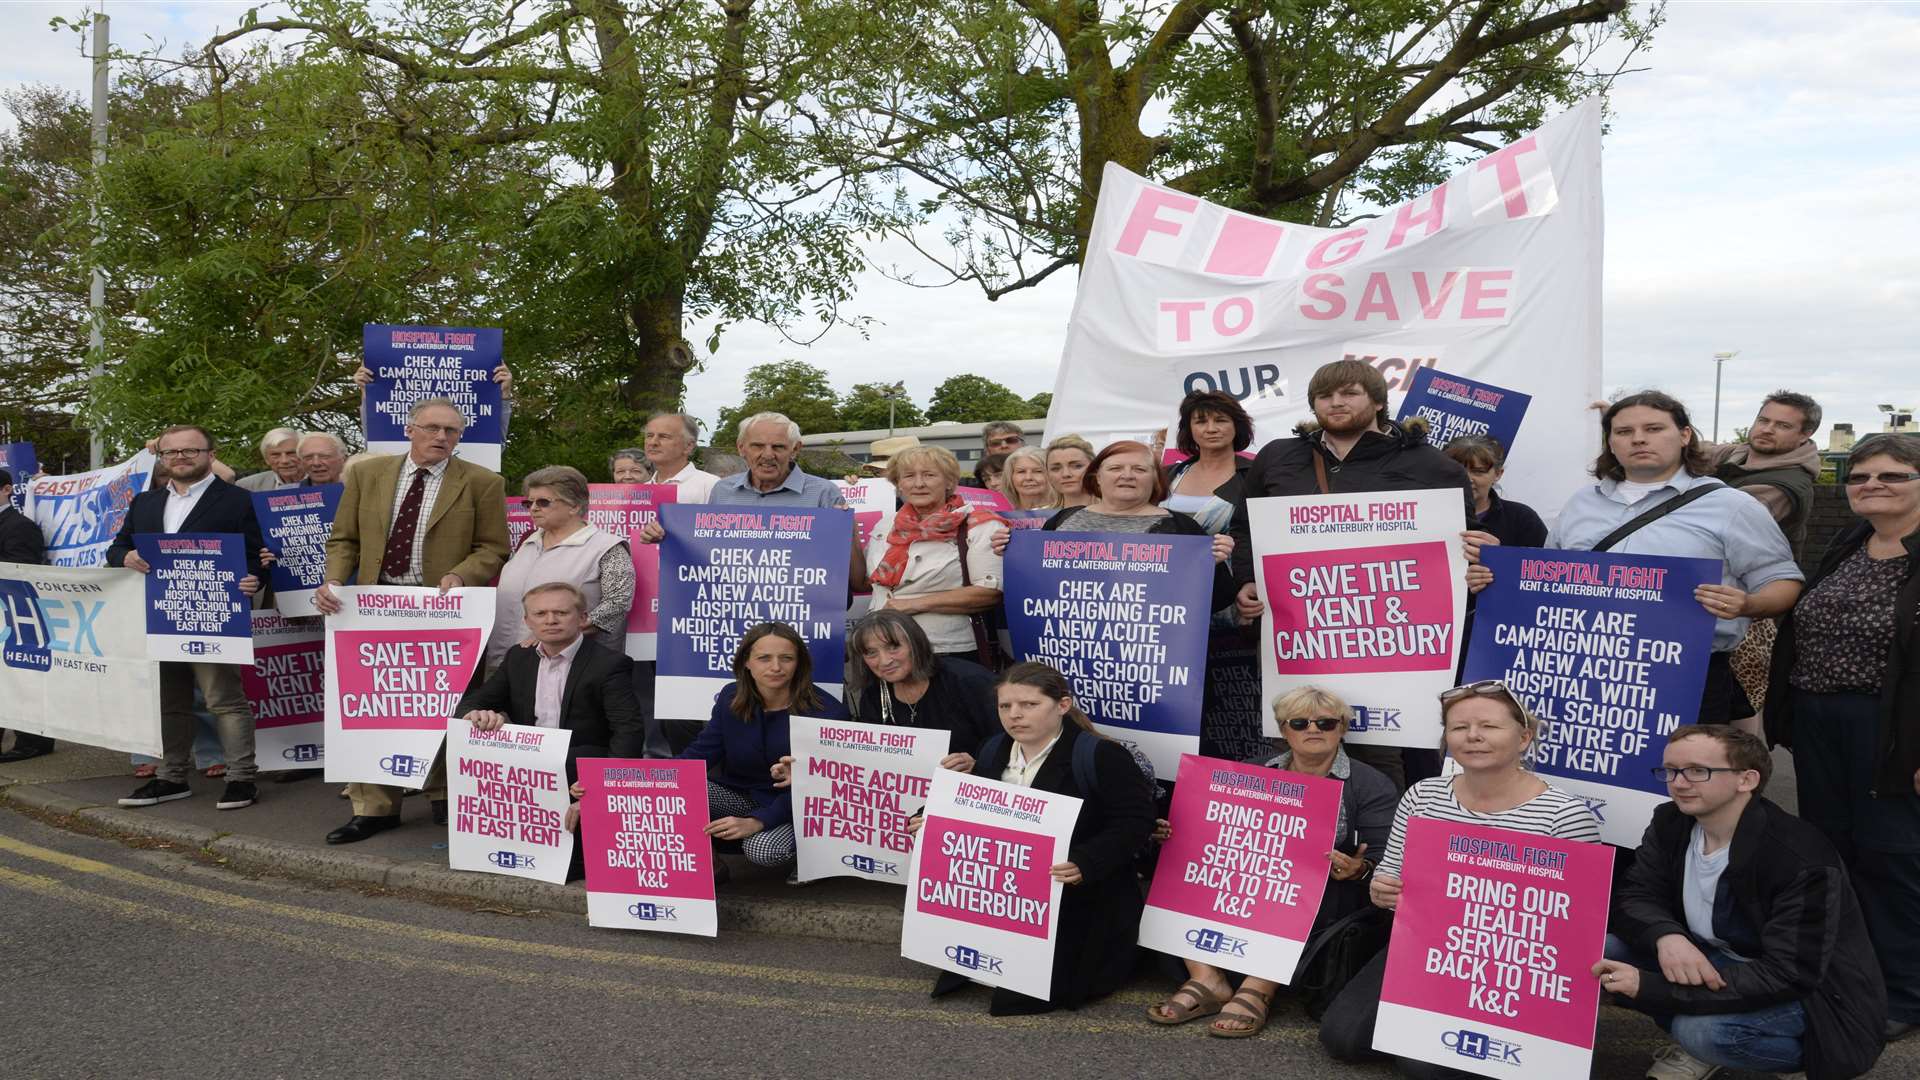 Protesters have been campaigning for improved hospital services in Canterbury